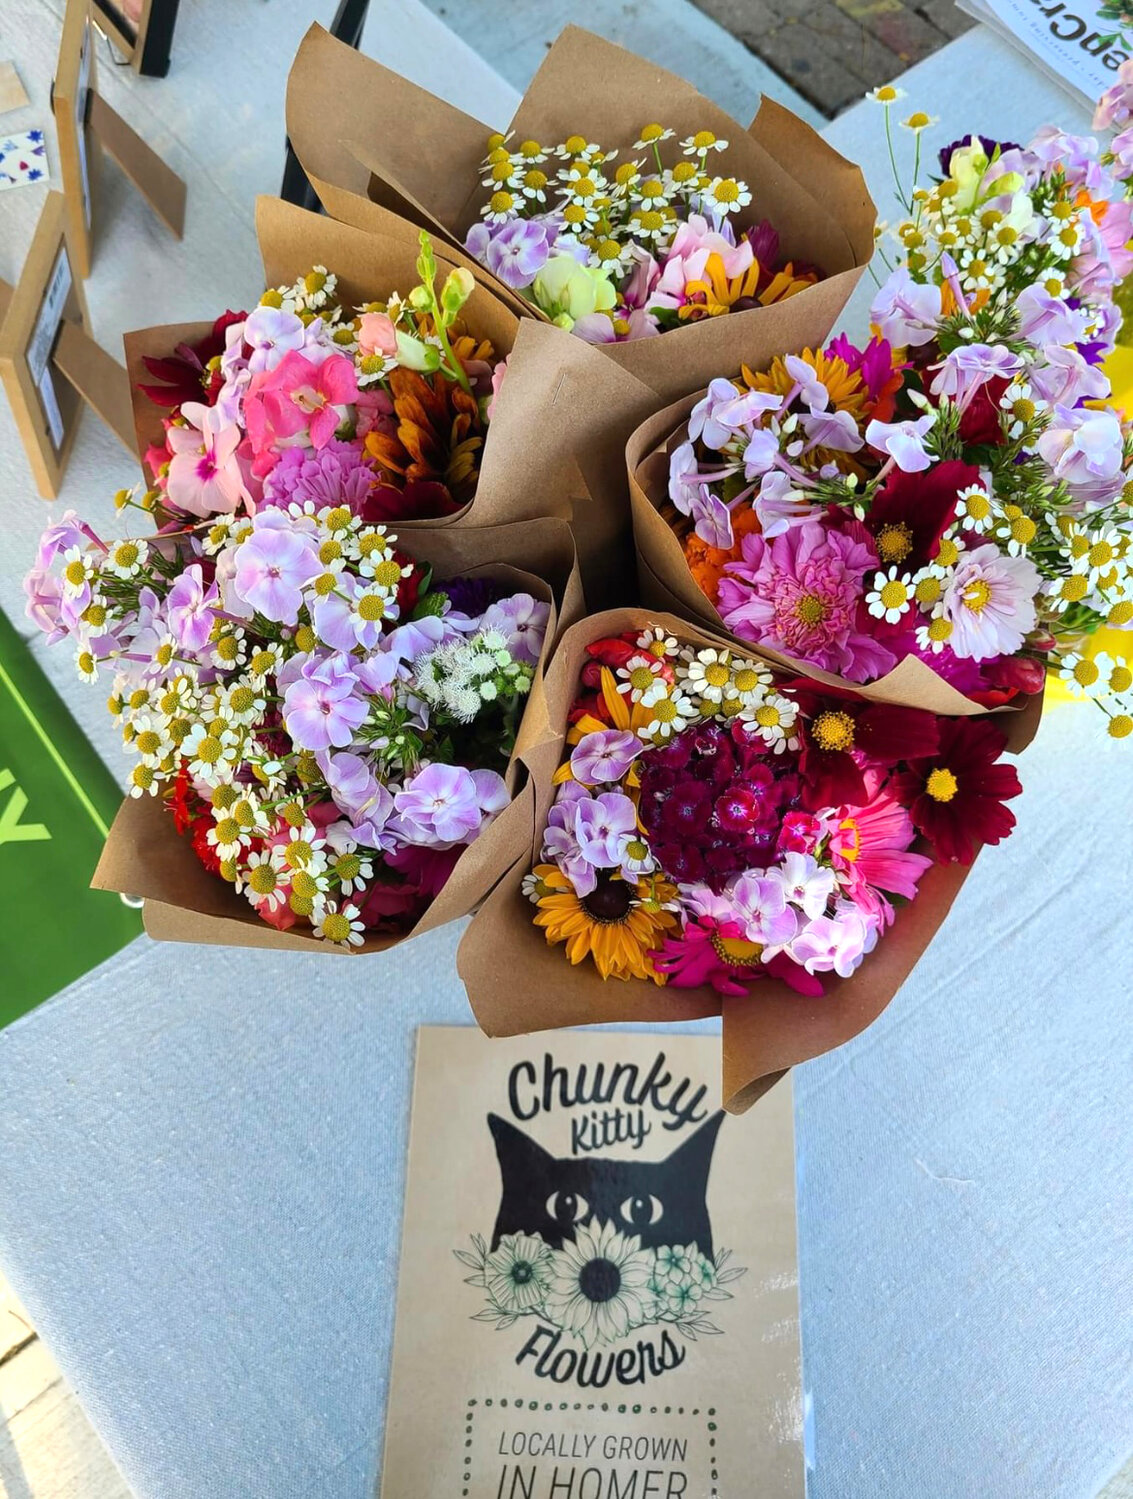 Chunky Kitty Flowers will sell its bouquets at the Cortland Farmers Market this season, which opens May 18 on Court Street. A Homer farmers market opens May 25 outside the Center for the Arts of Homer.